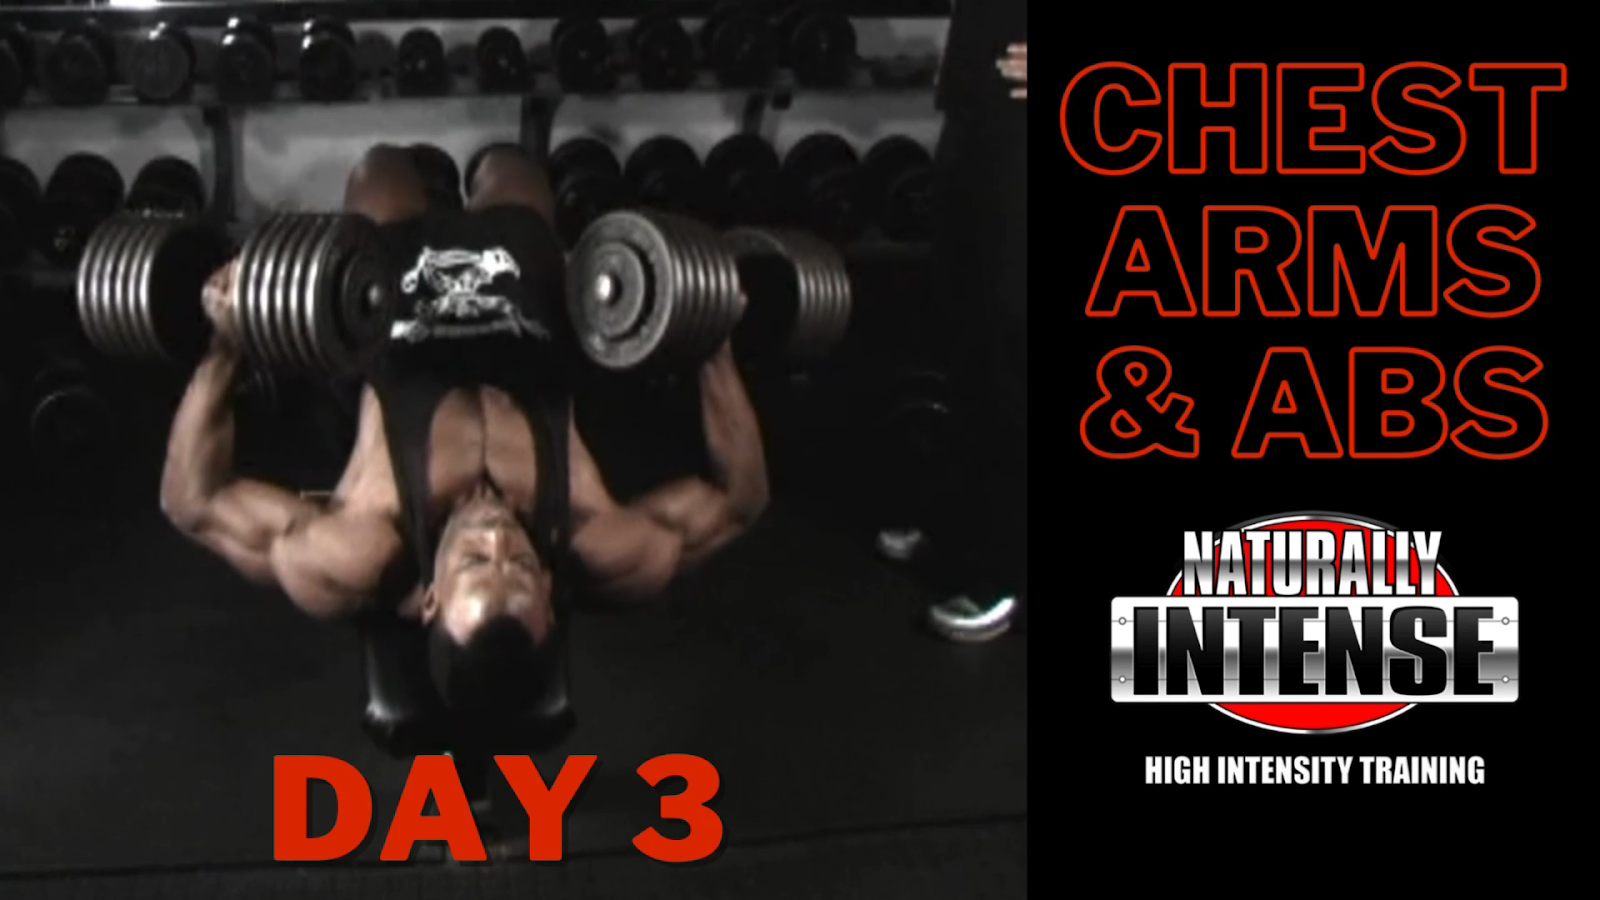 Bodybuilder Kevin Richardson's high intensity training split puts chest, arms, and abs as day 3